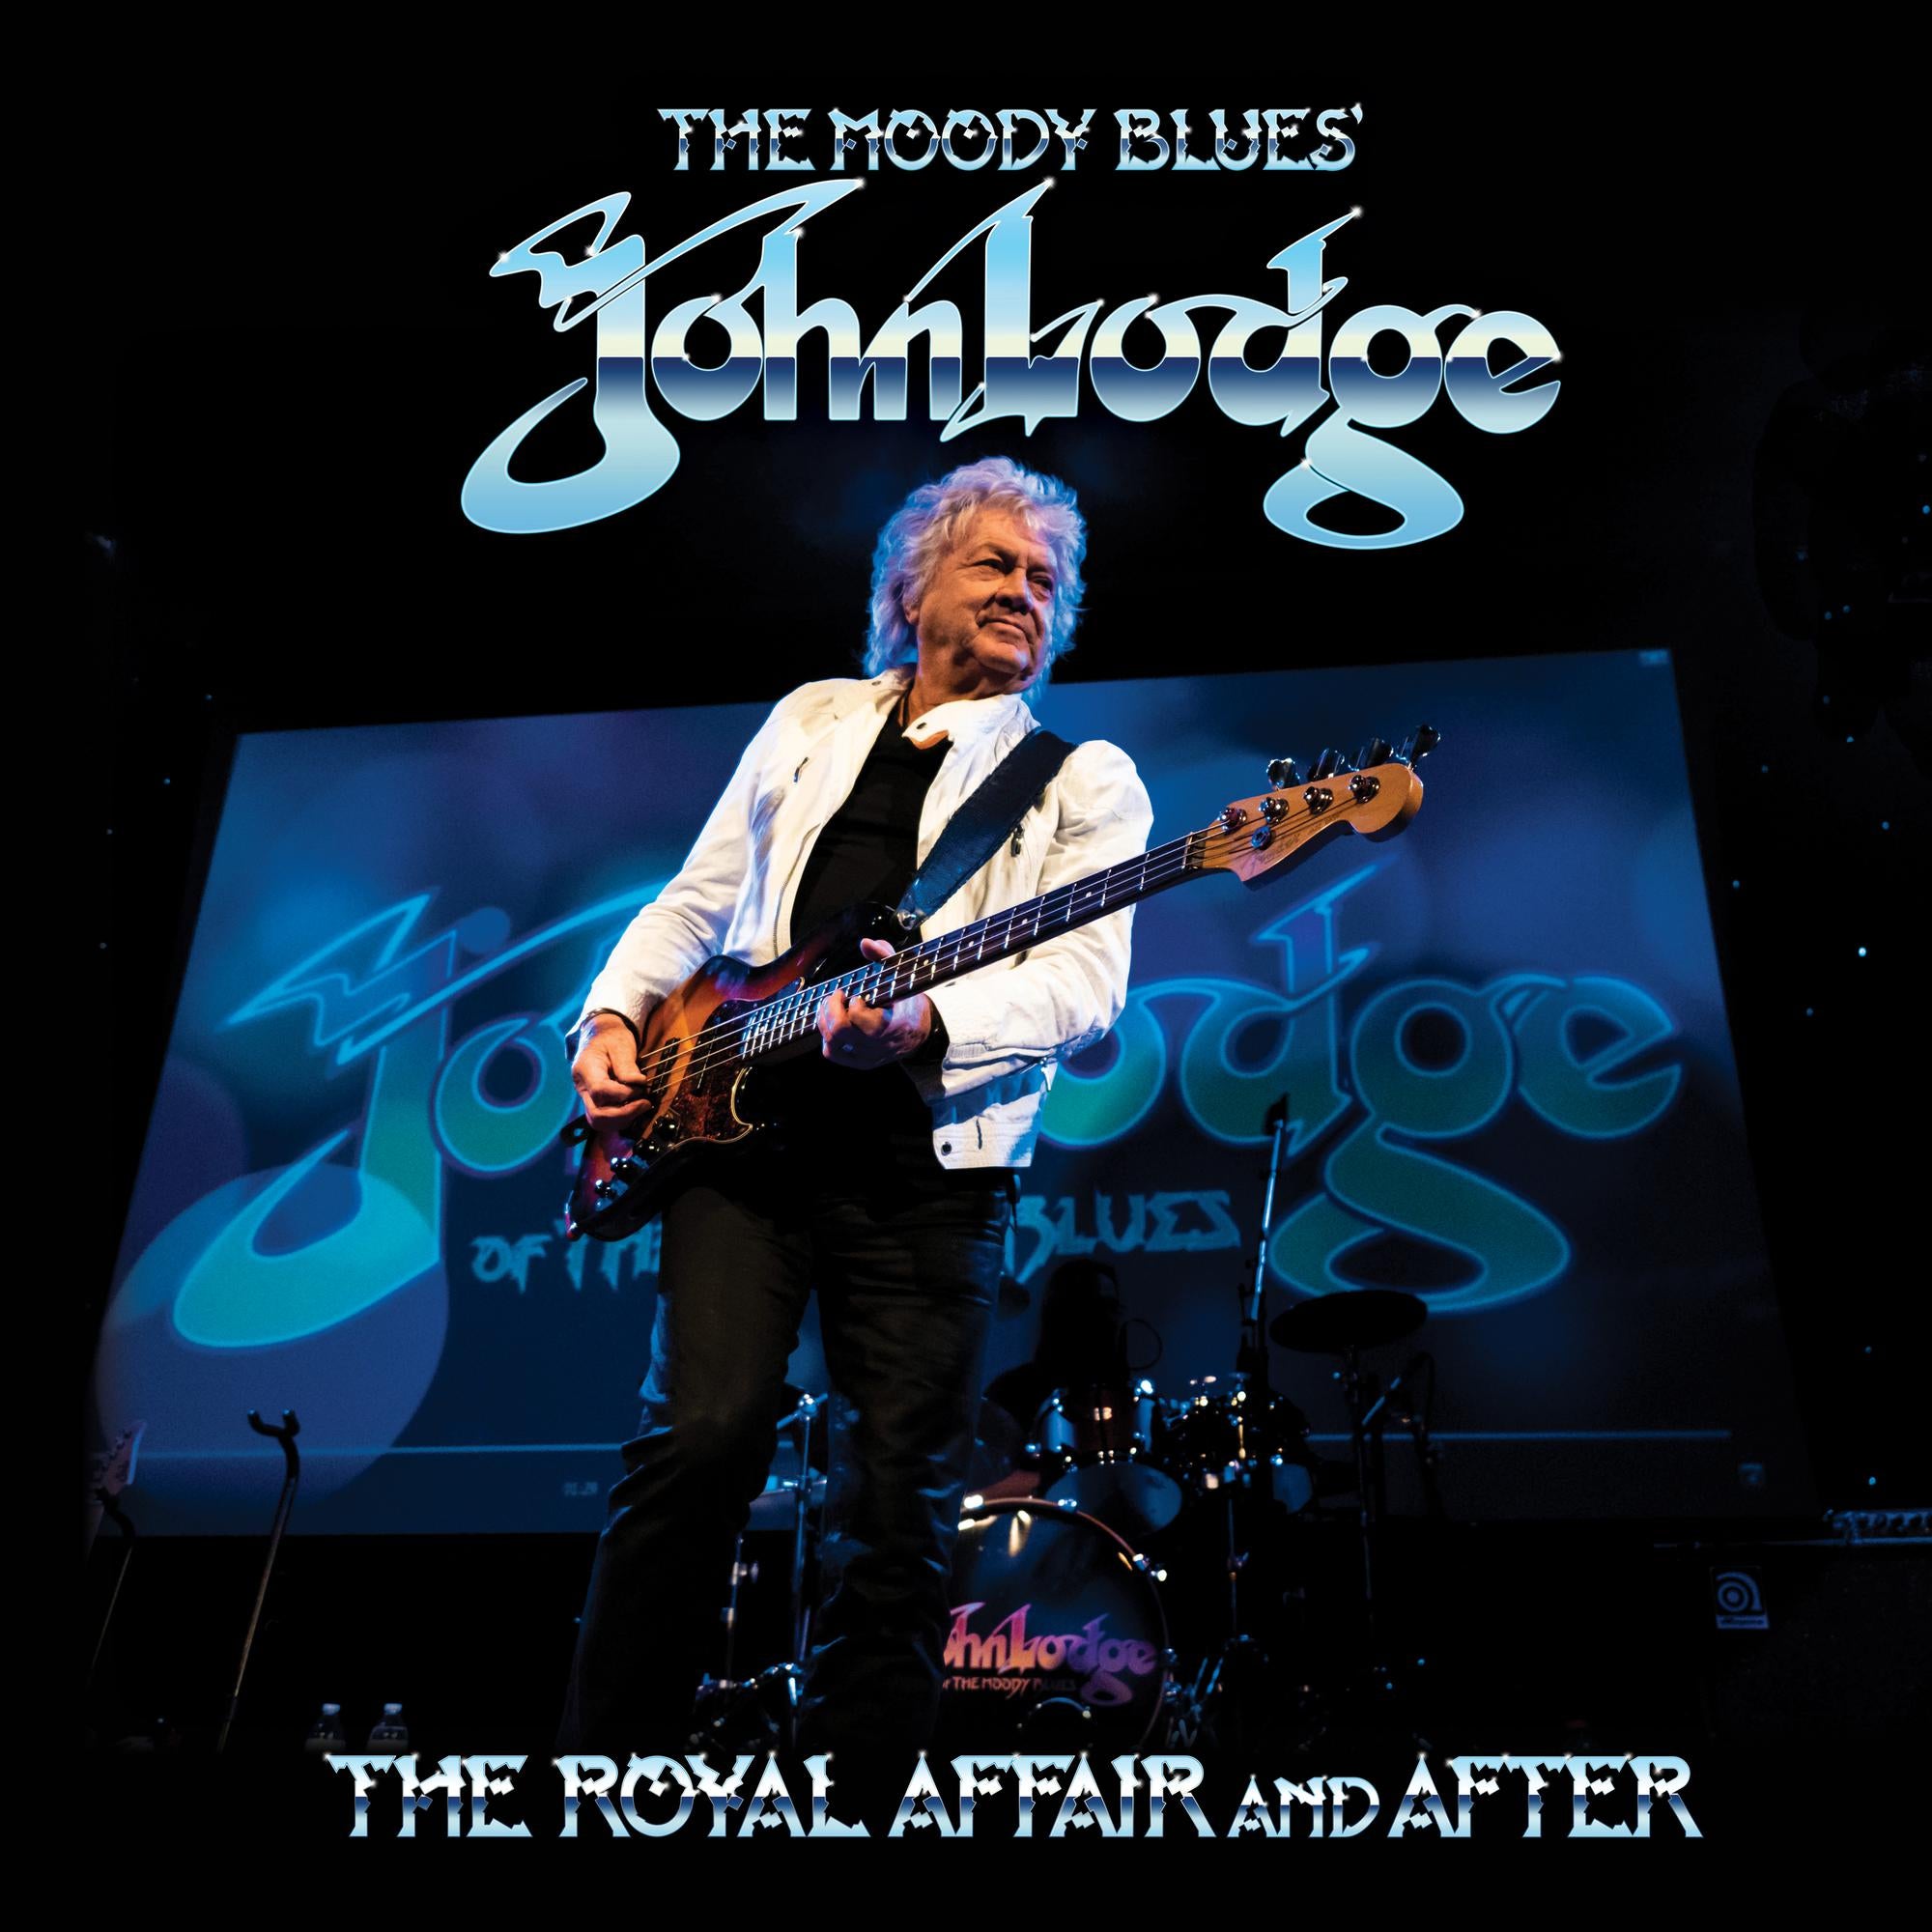 JOHN LODGE 'THE ROYAL AFFAIR AND AFTER' LP (Limited Edition Blue Vinyl)